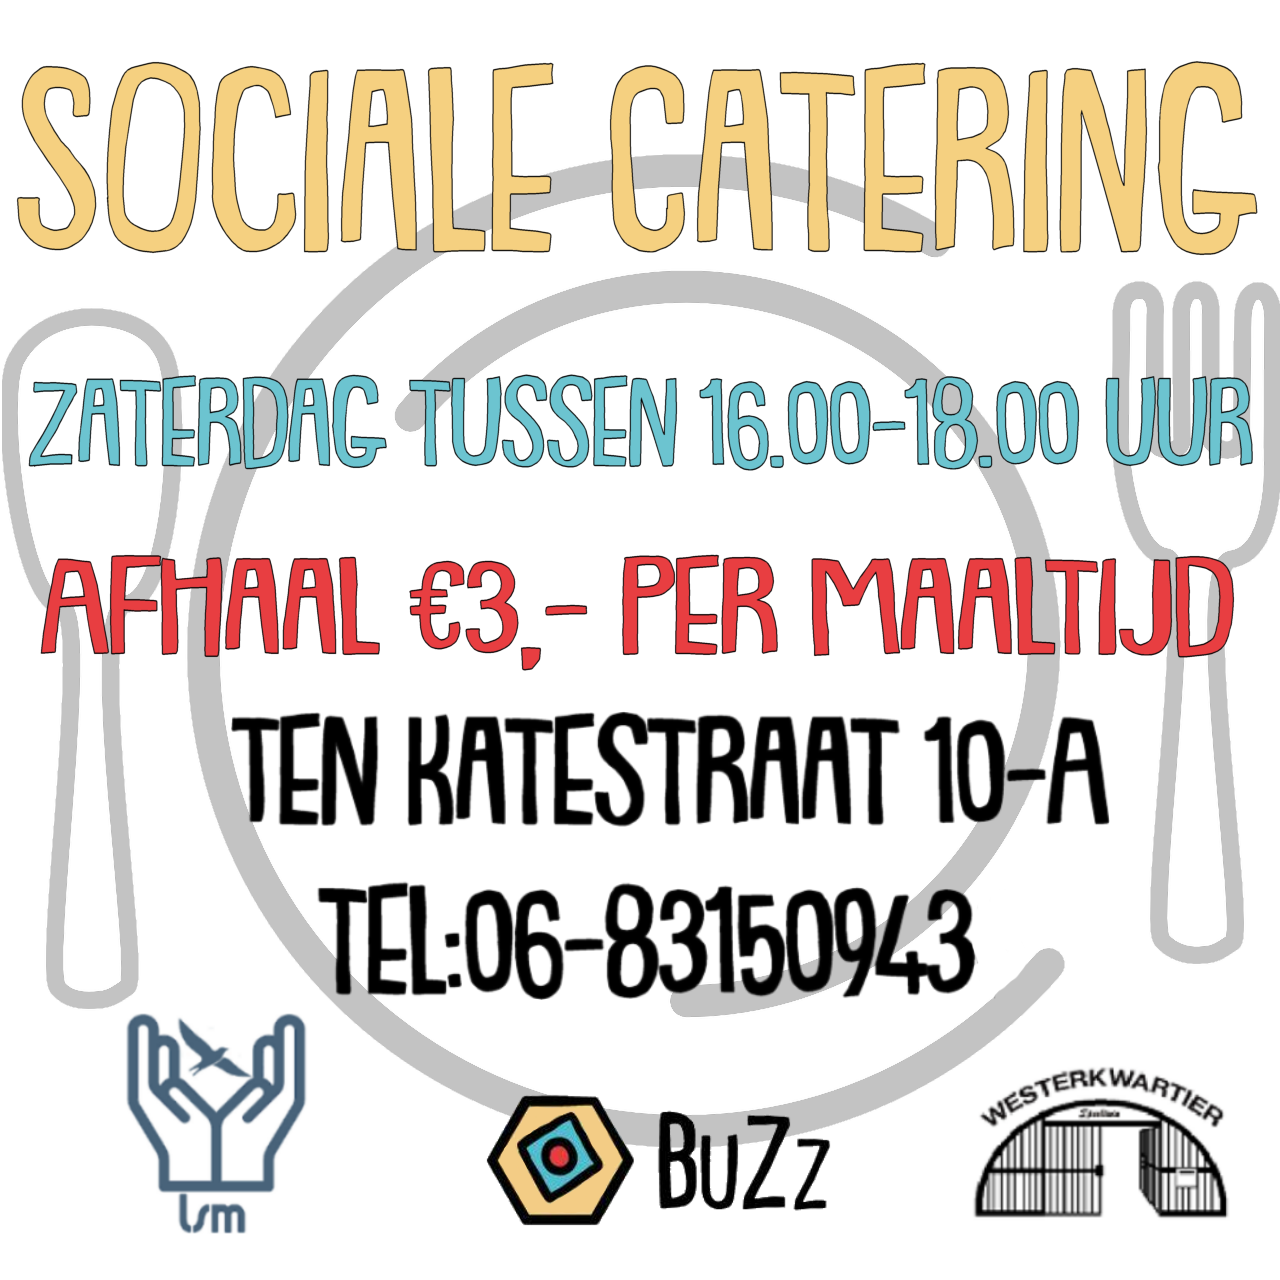 Sociale catering